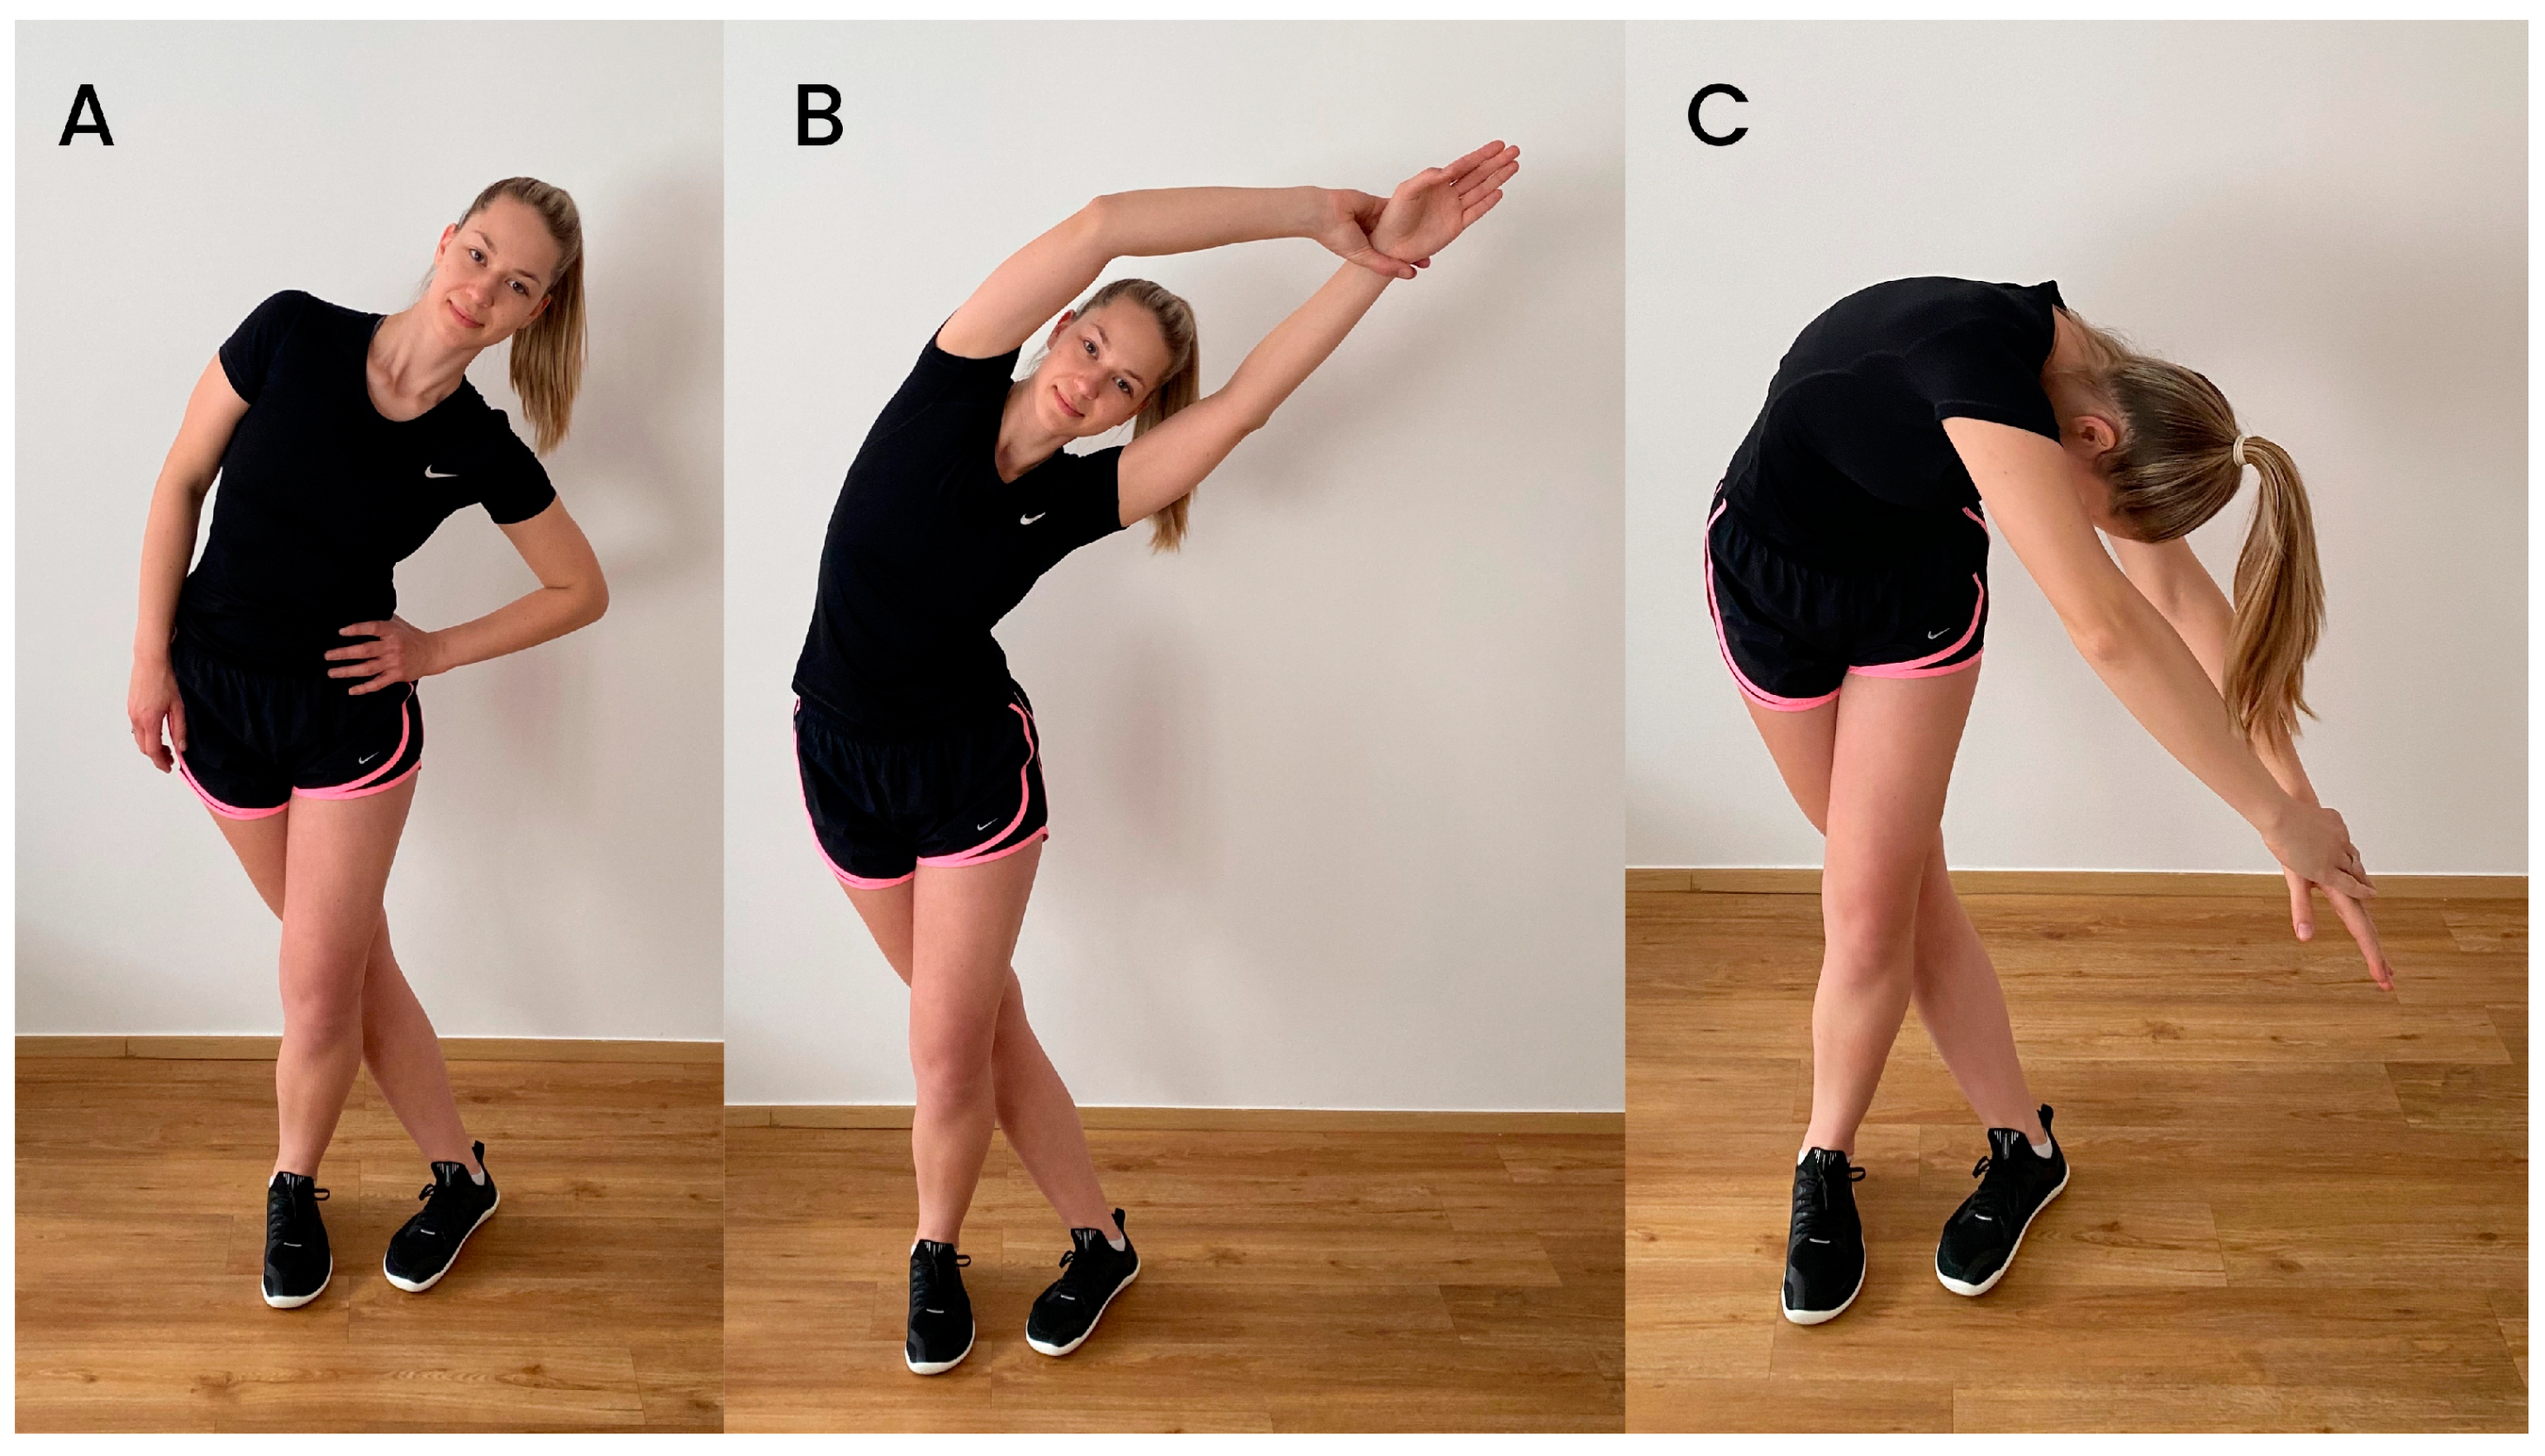 The Use of Elastic Resistance Bands to Reduce Dynamic Knee Valgus in  Squat-Based Movements: A Narrative Review